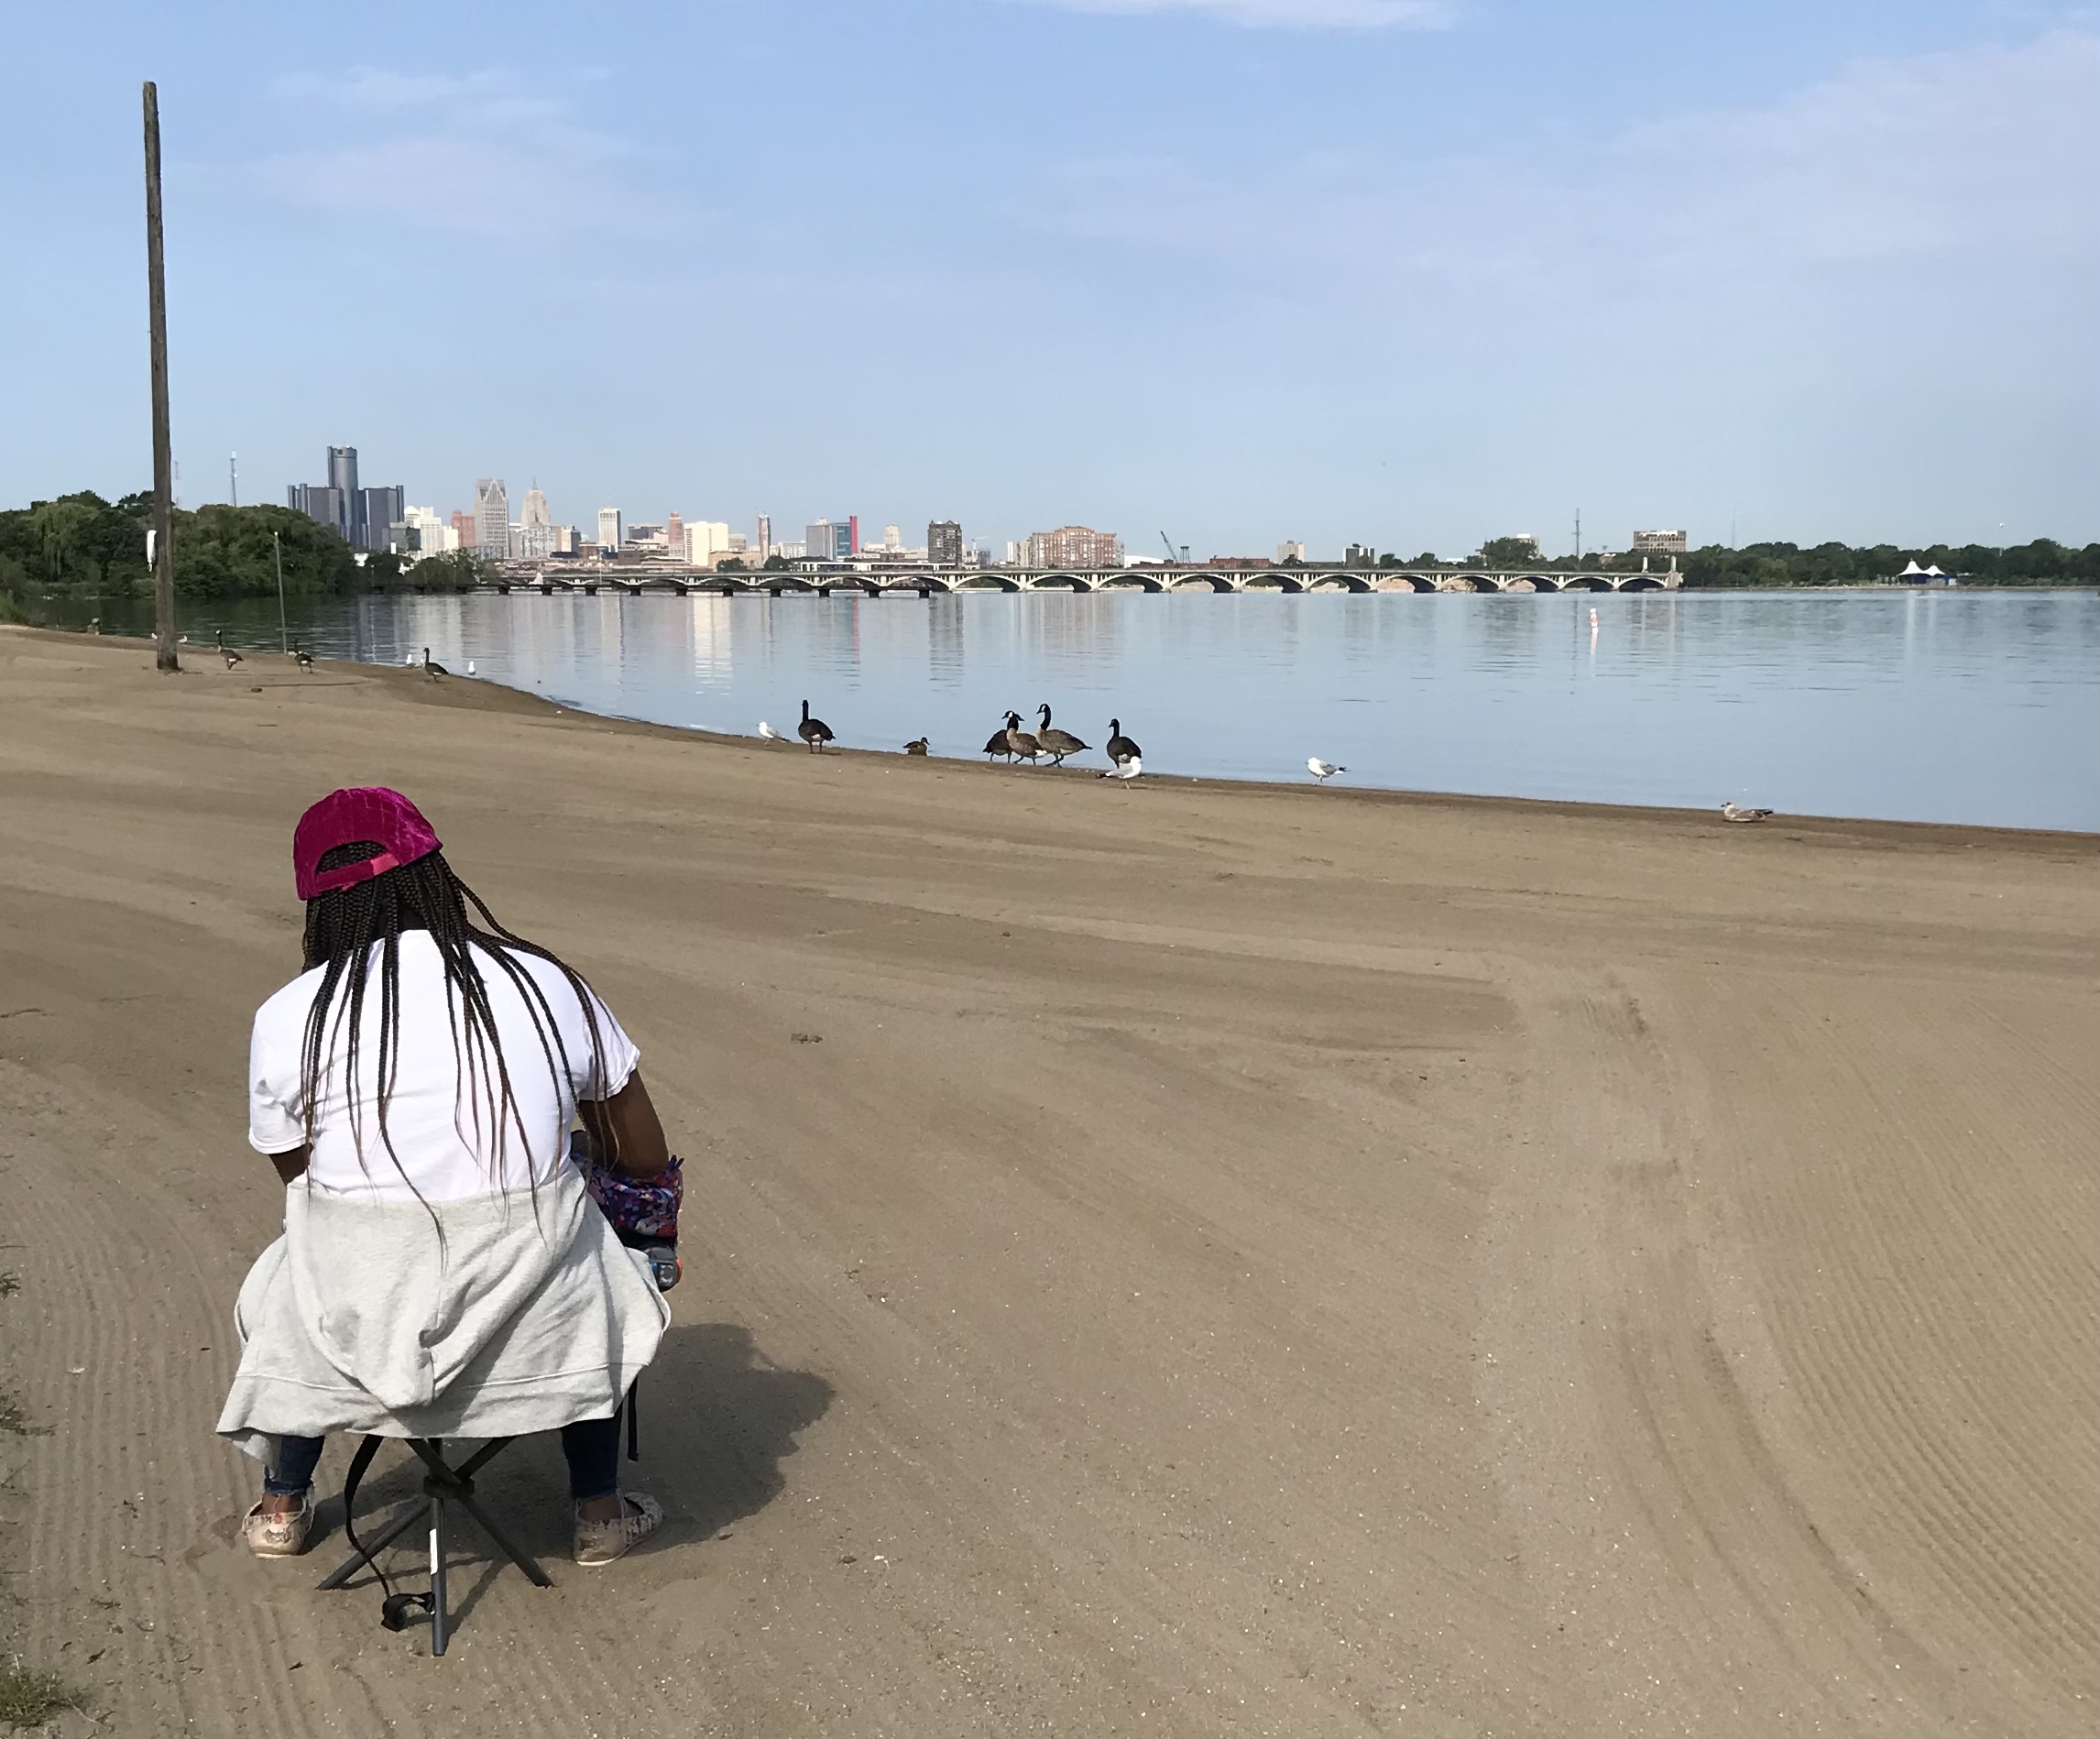 A teacher sitting on the beach observing birds with Detroit in the background